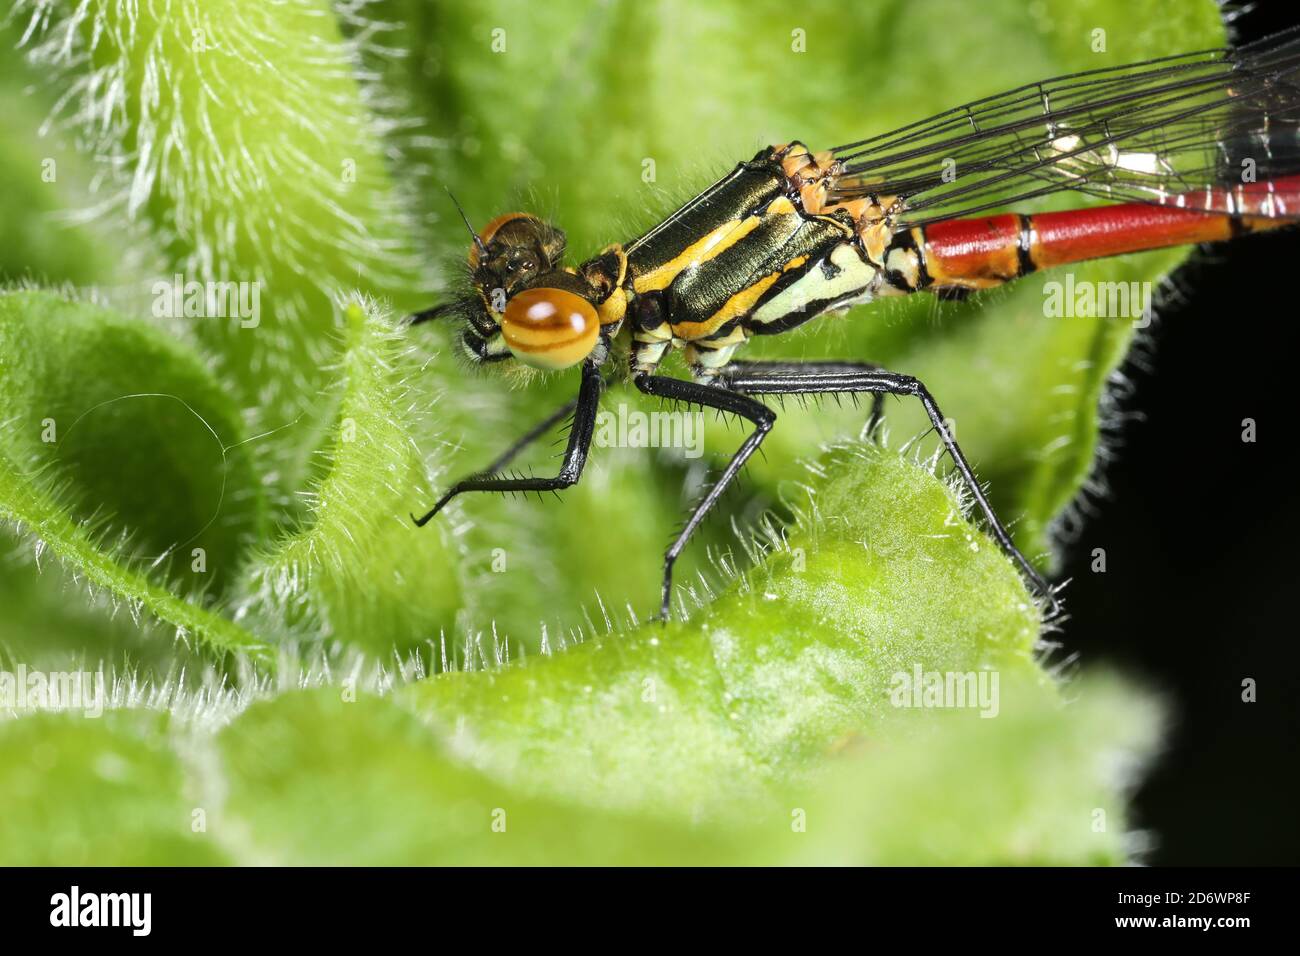 Close-up portrait of large red damselfly, UK. Stock Photo